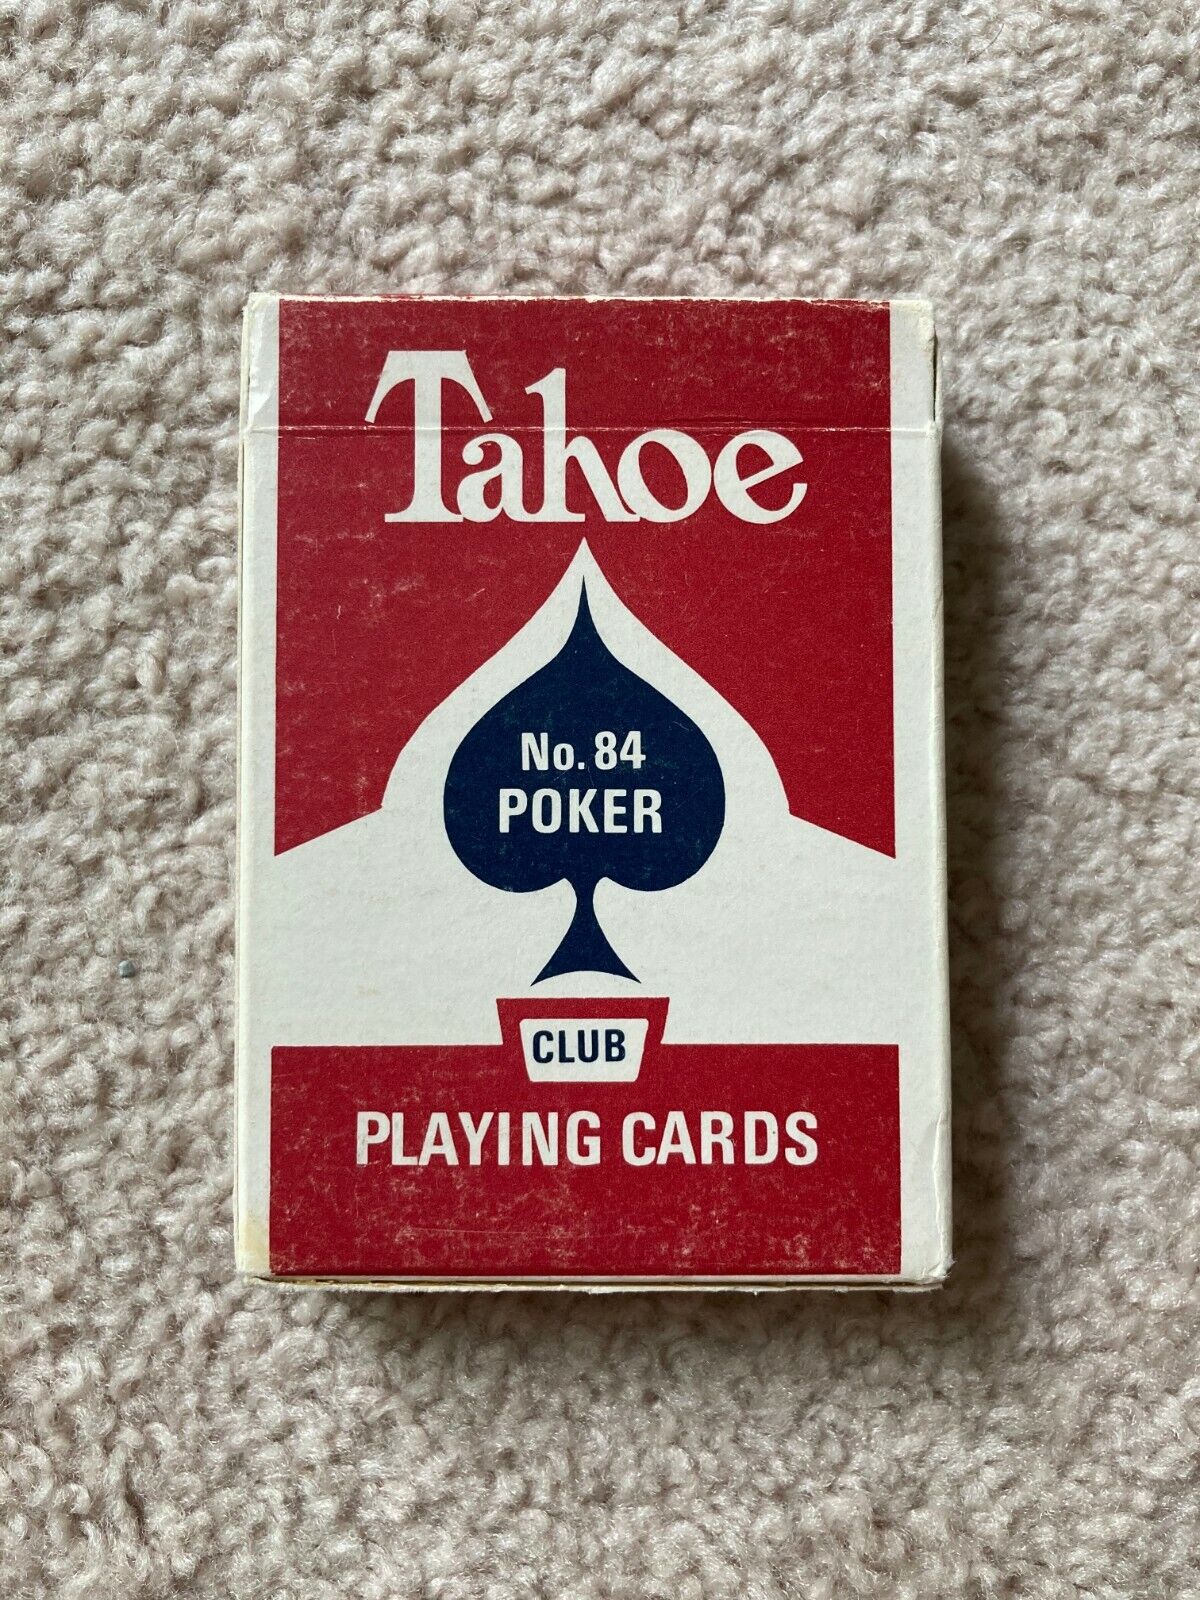 Red Arrco Tahoe No. 84 Club Back 9 playing cards - original, NOT REPRINT